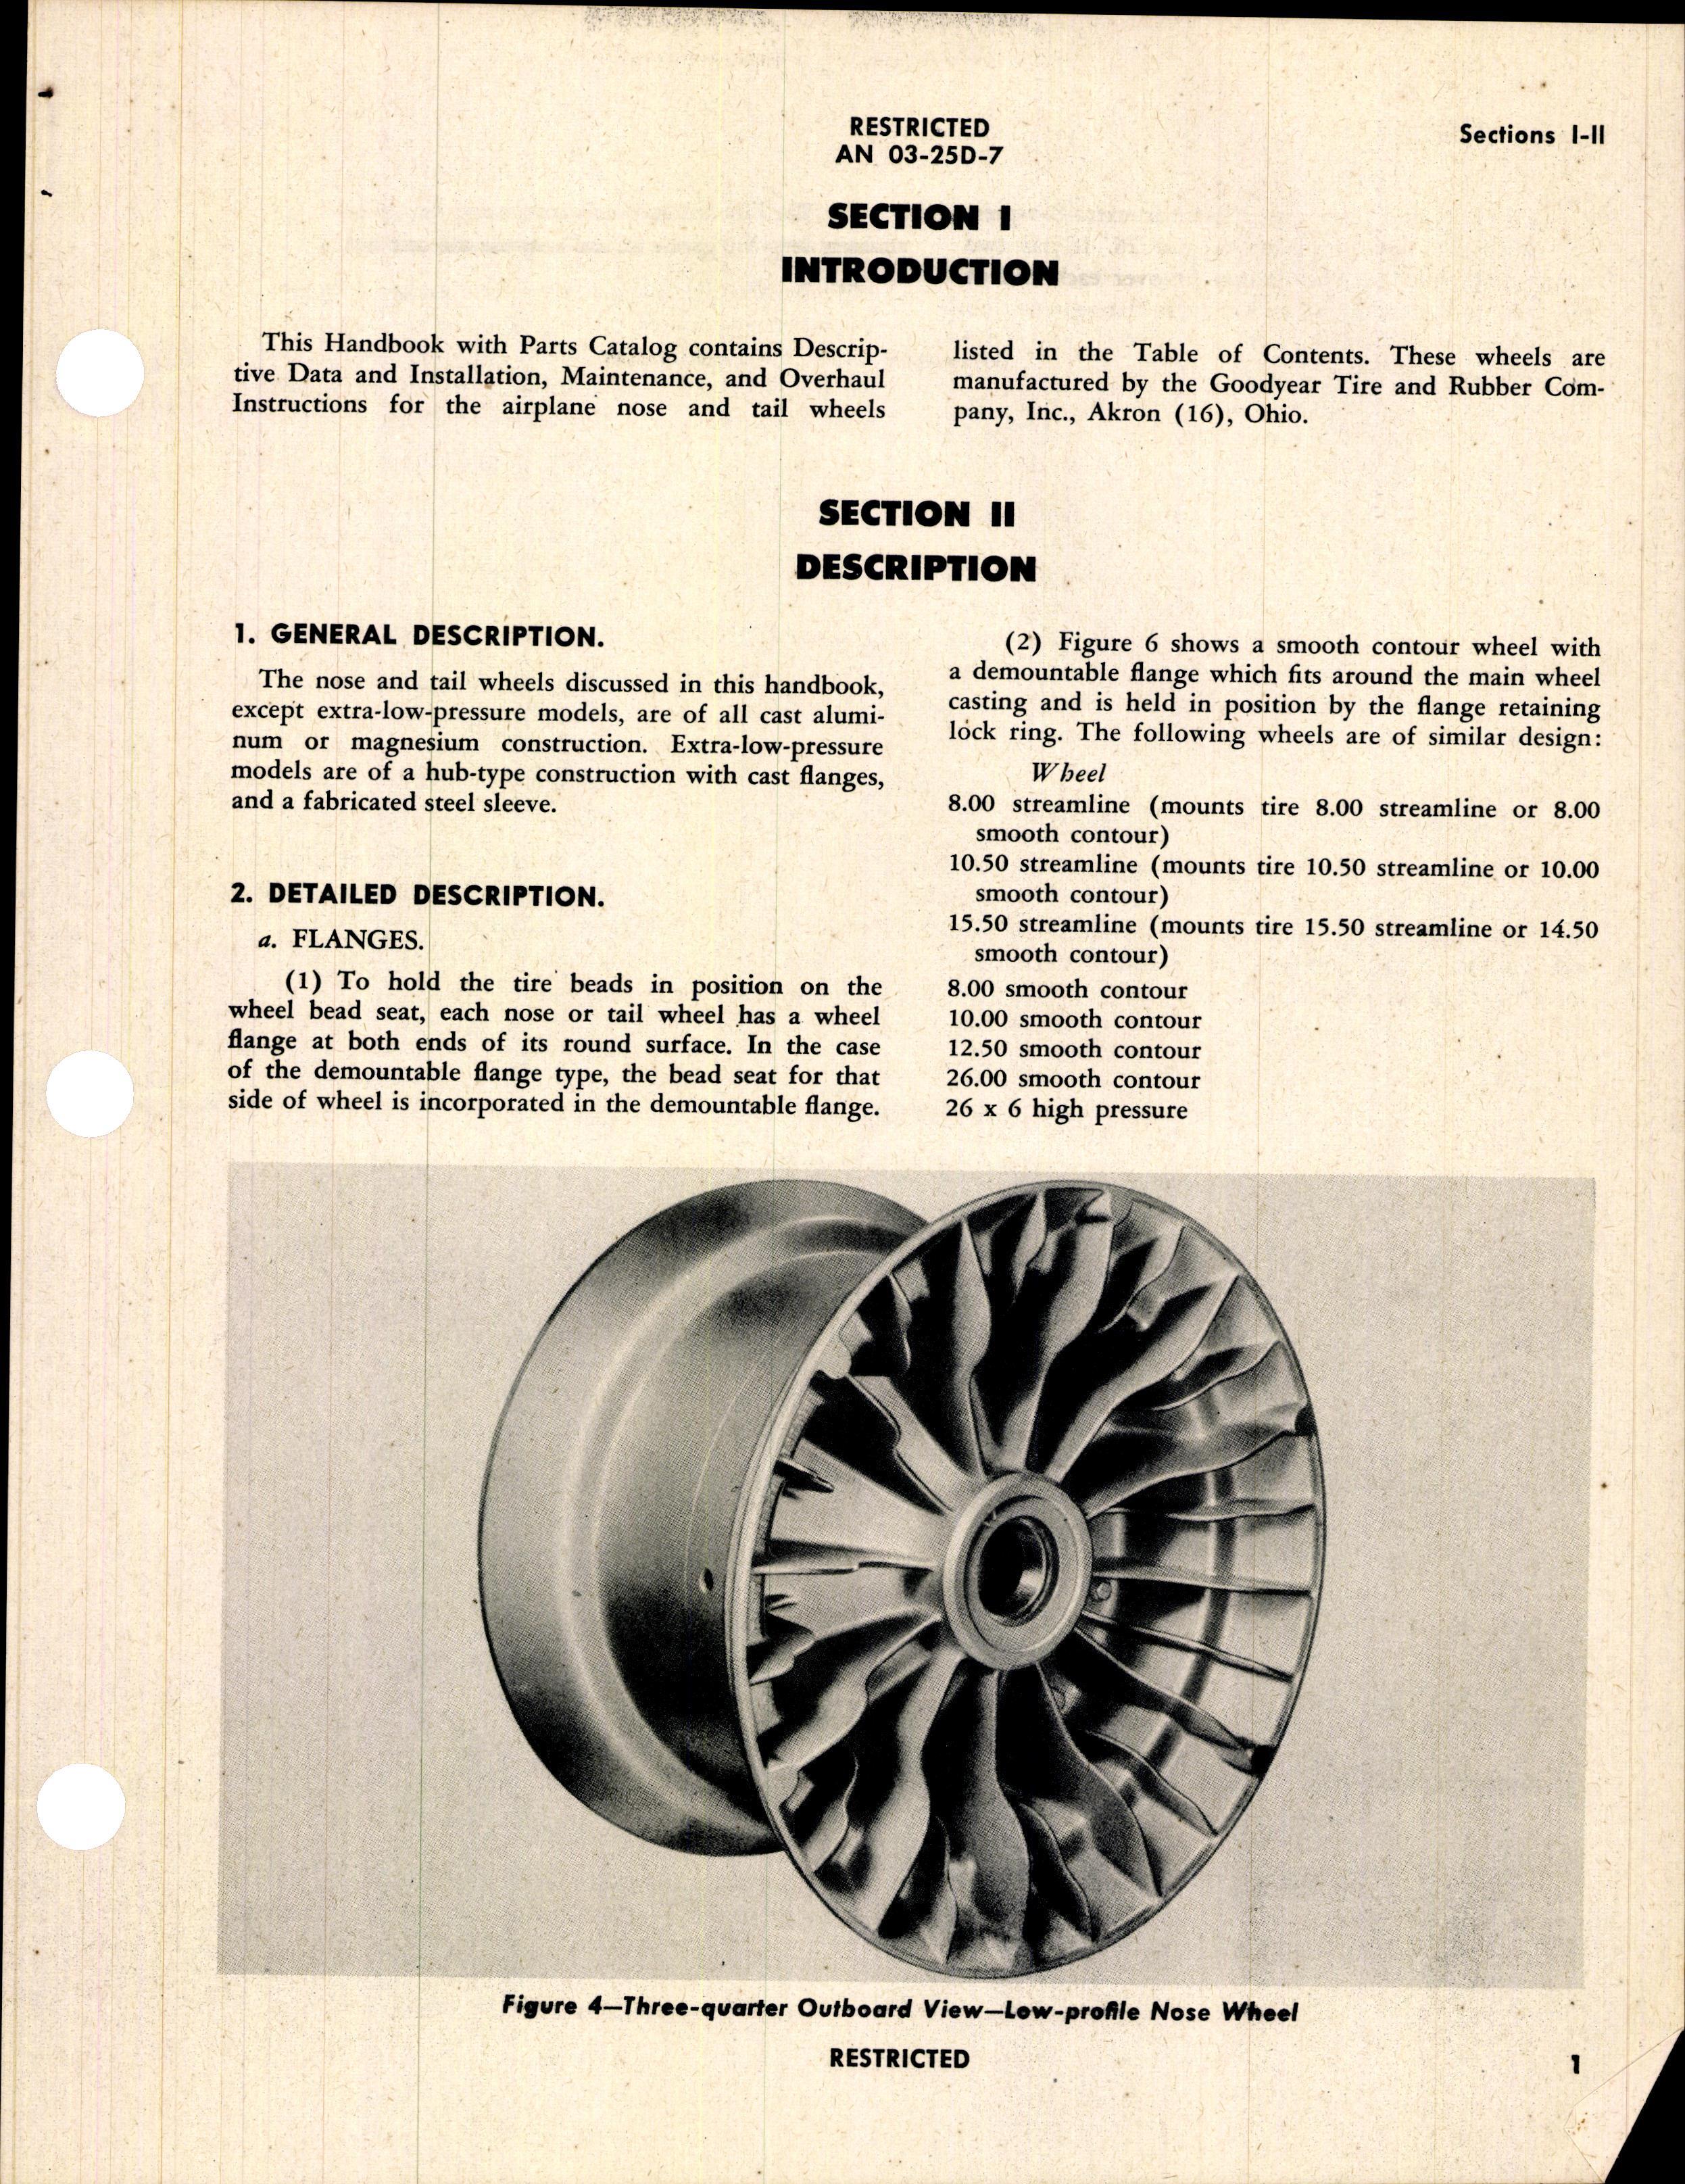 Sample page 7 from AirCorps Library document: Operation, Service, & Overhaul Instructions with Parts Catalog for Goodyear Nose and Tail Wheels